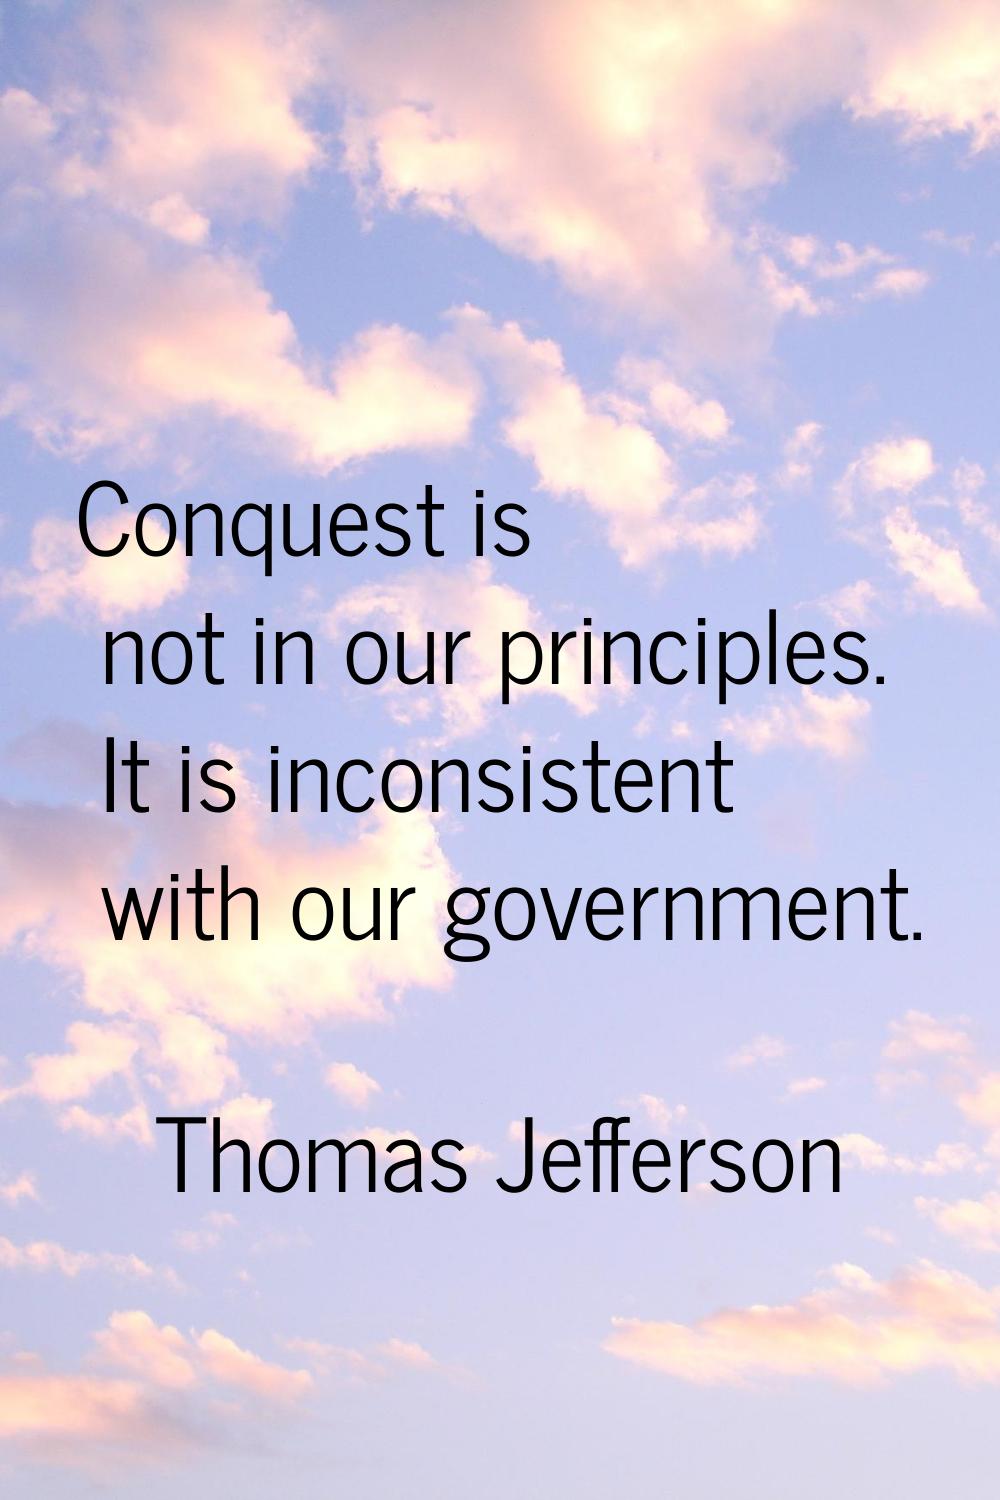 Conquest is not in our principles. It is inconsistent with our government.